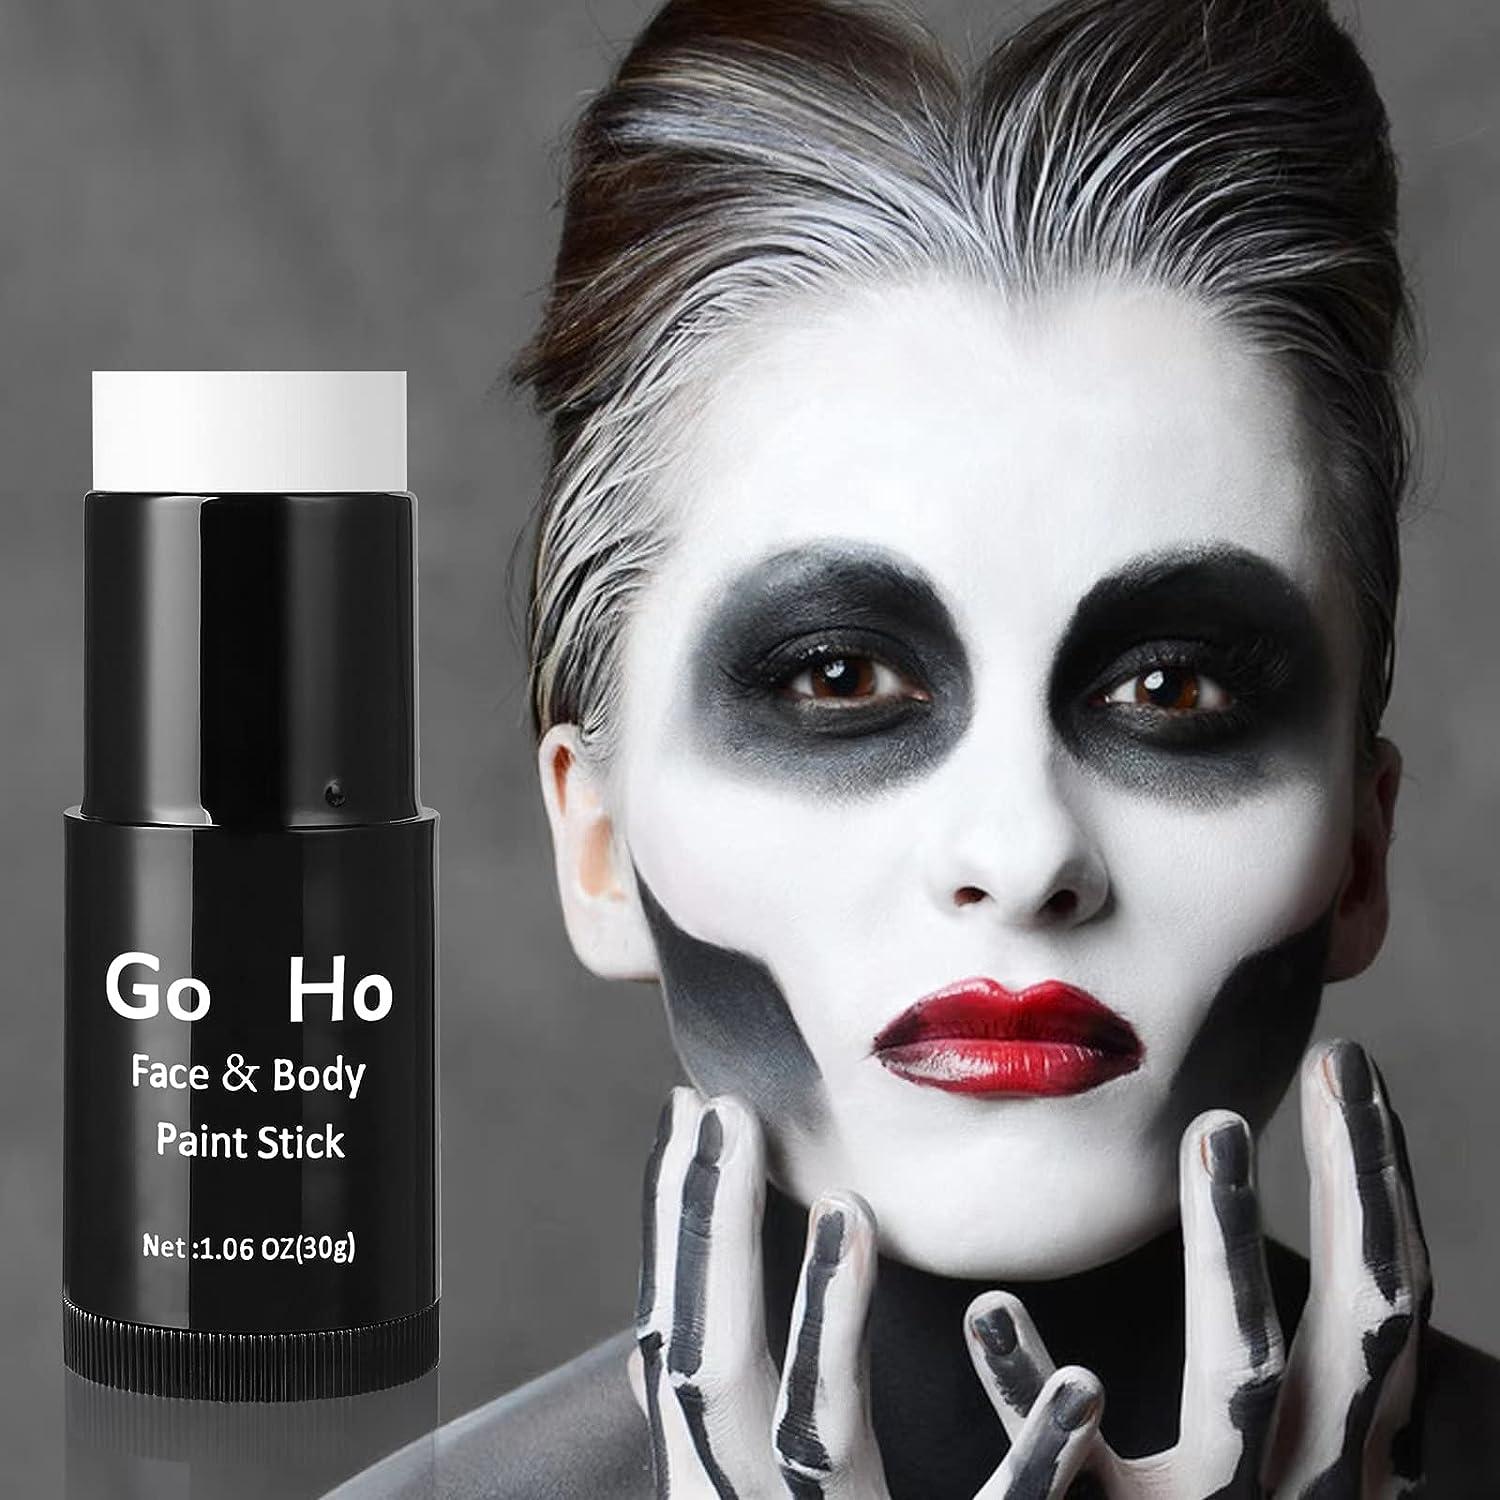 Clown White Face Body Painting Foundation